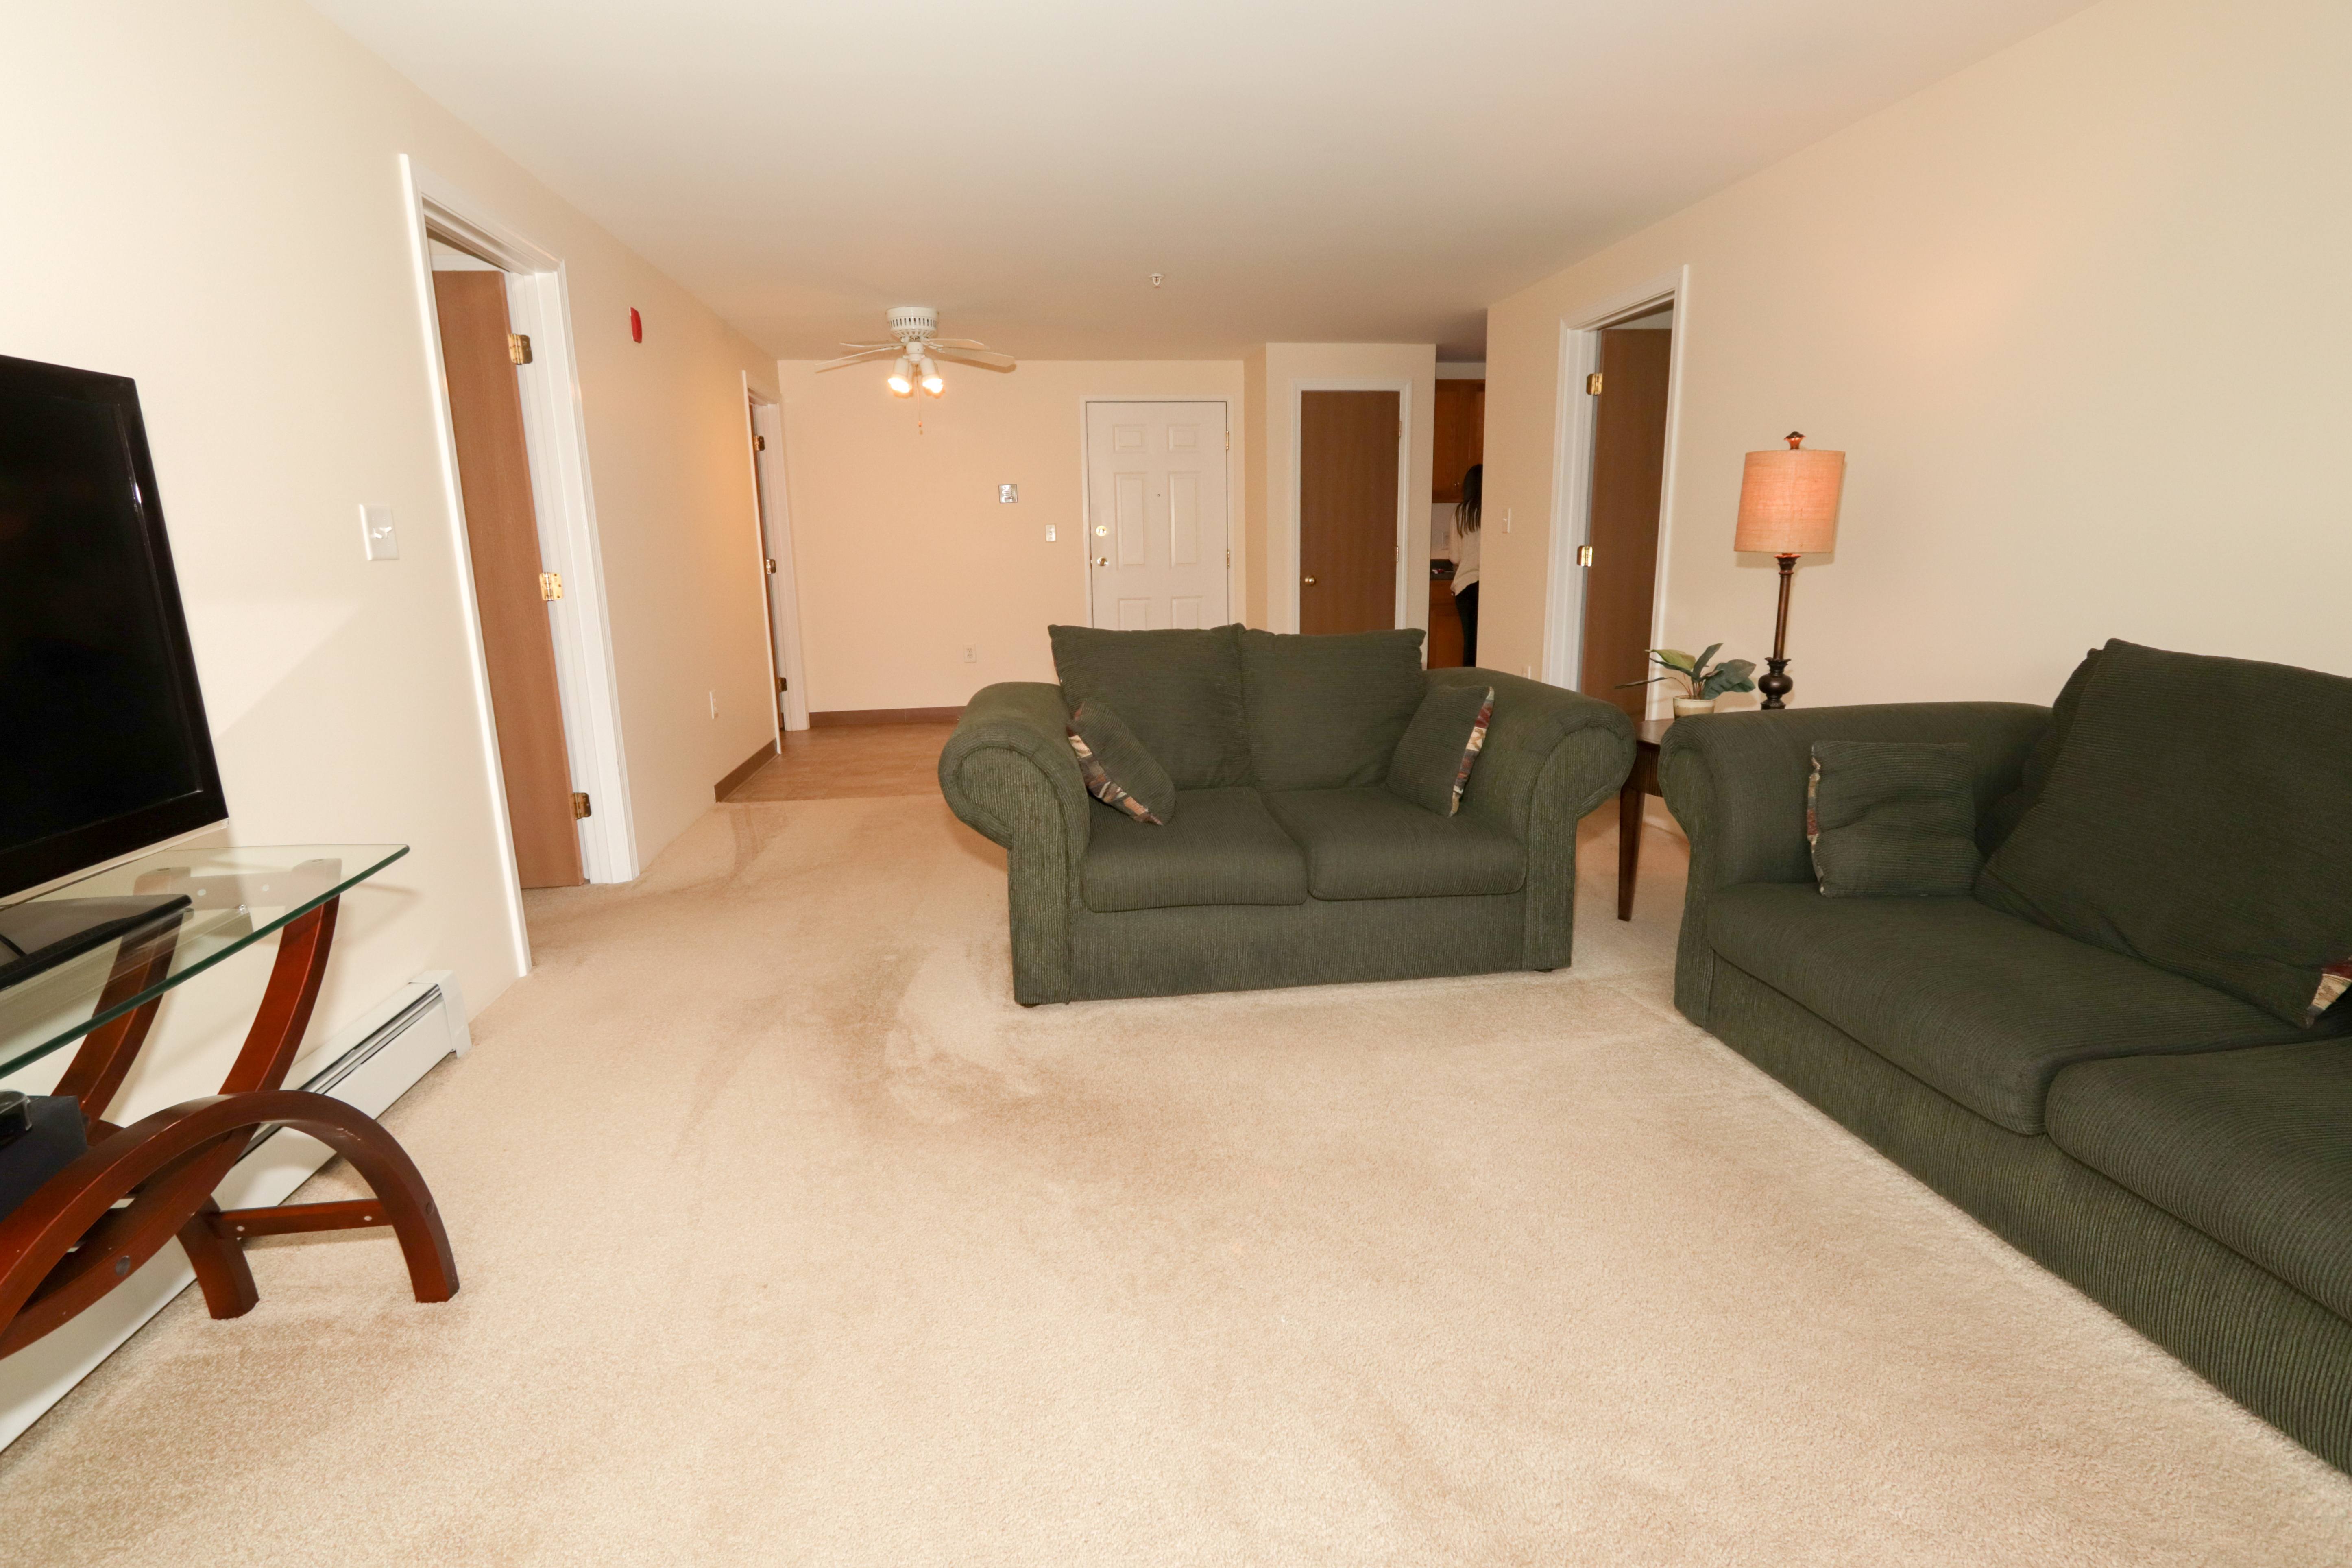 Milford condo for sale at Quarrywood Green 59 Ponemah Hill Rd Apt 2-LL2 Milford NH 03055 living dining room